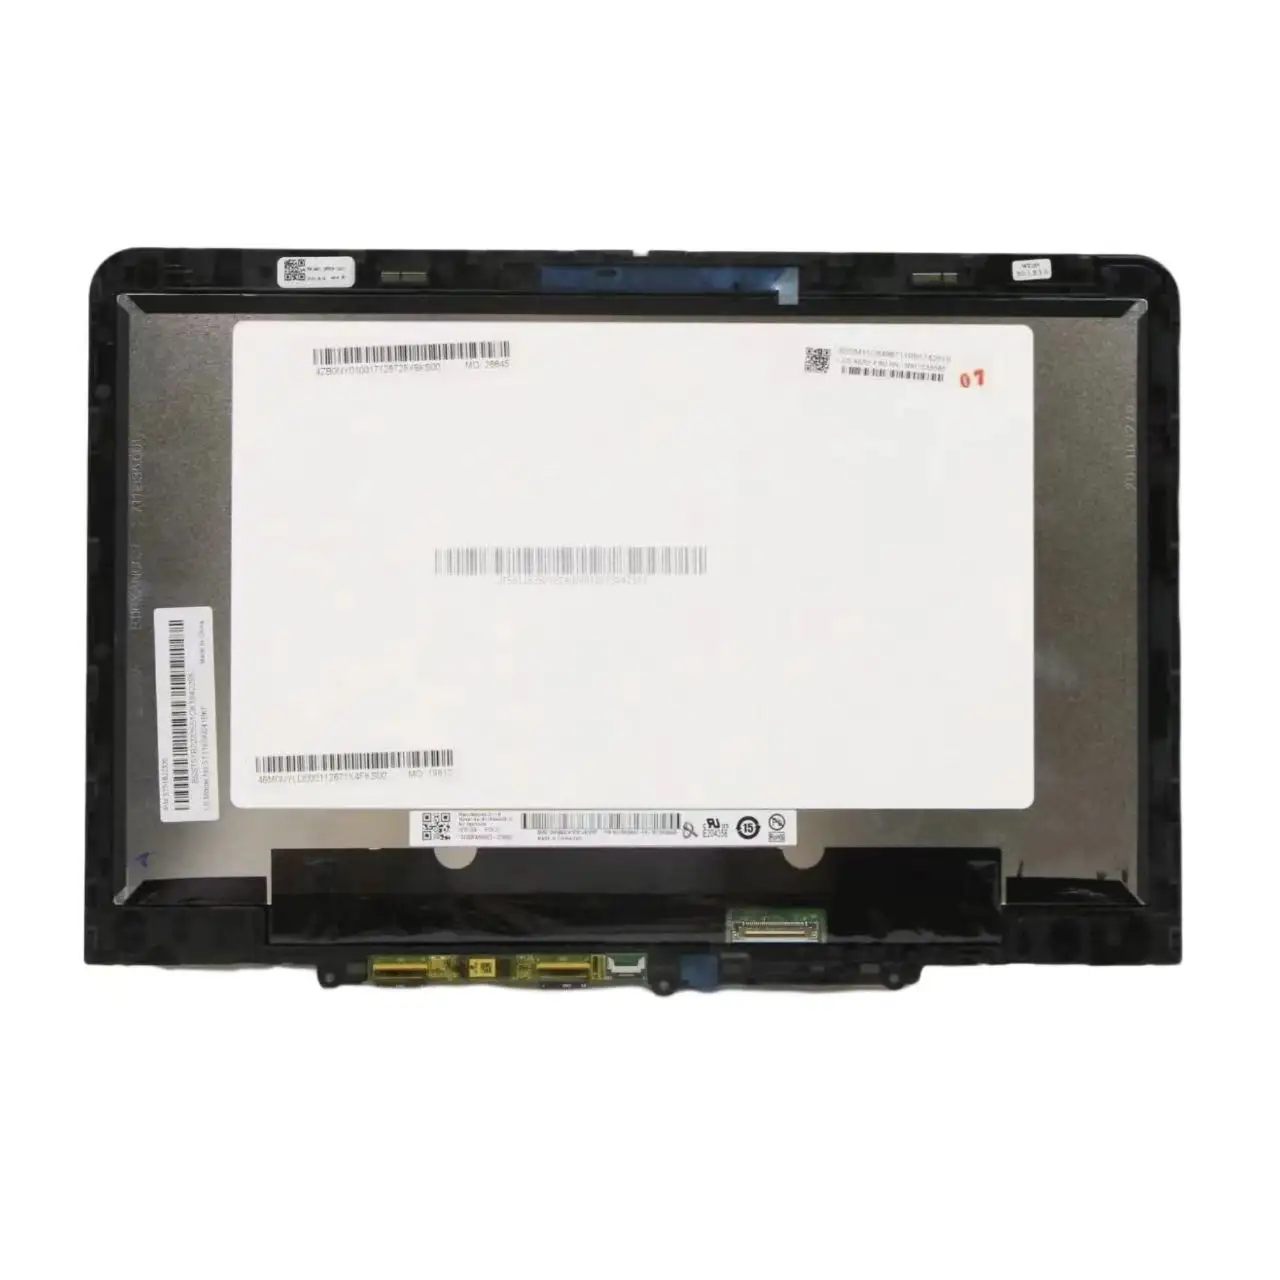 11.6 Inch LCD For Lenovo 300w Gen 3 Touch Screen Assembly 5M11C85595 5M11C85596 5M11C85597 5M11F29040 5M11F29041 5M11F29042